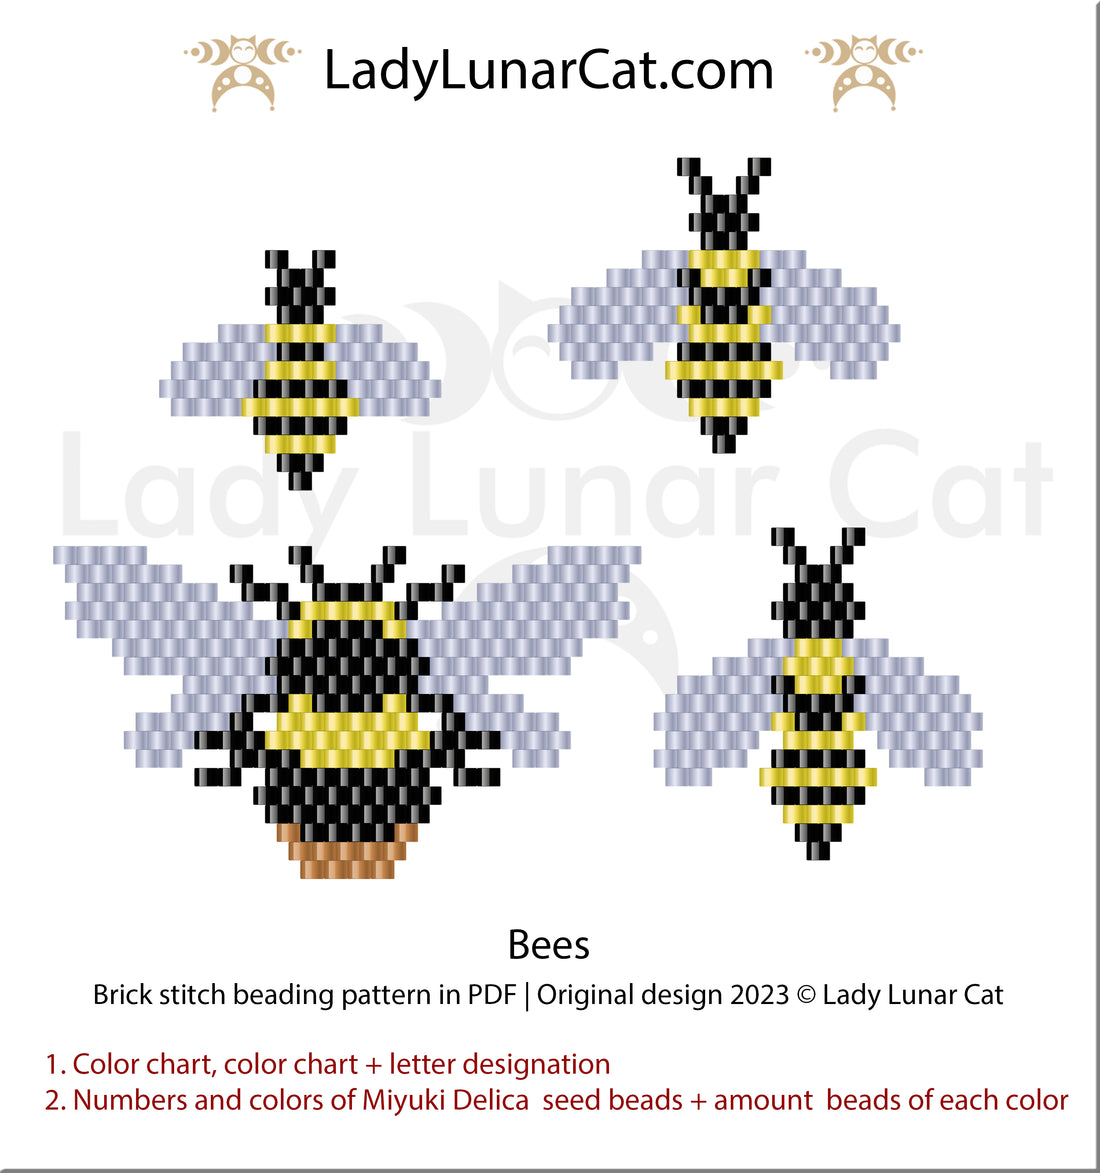 FREE Brick stitch pattern for beading Bees by Lady Lunar Cat